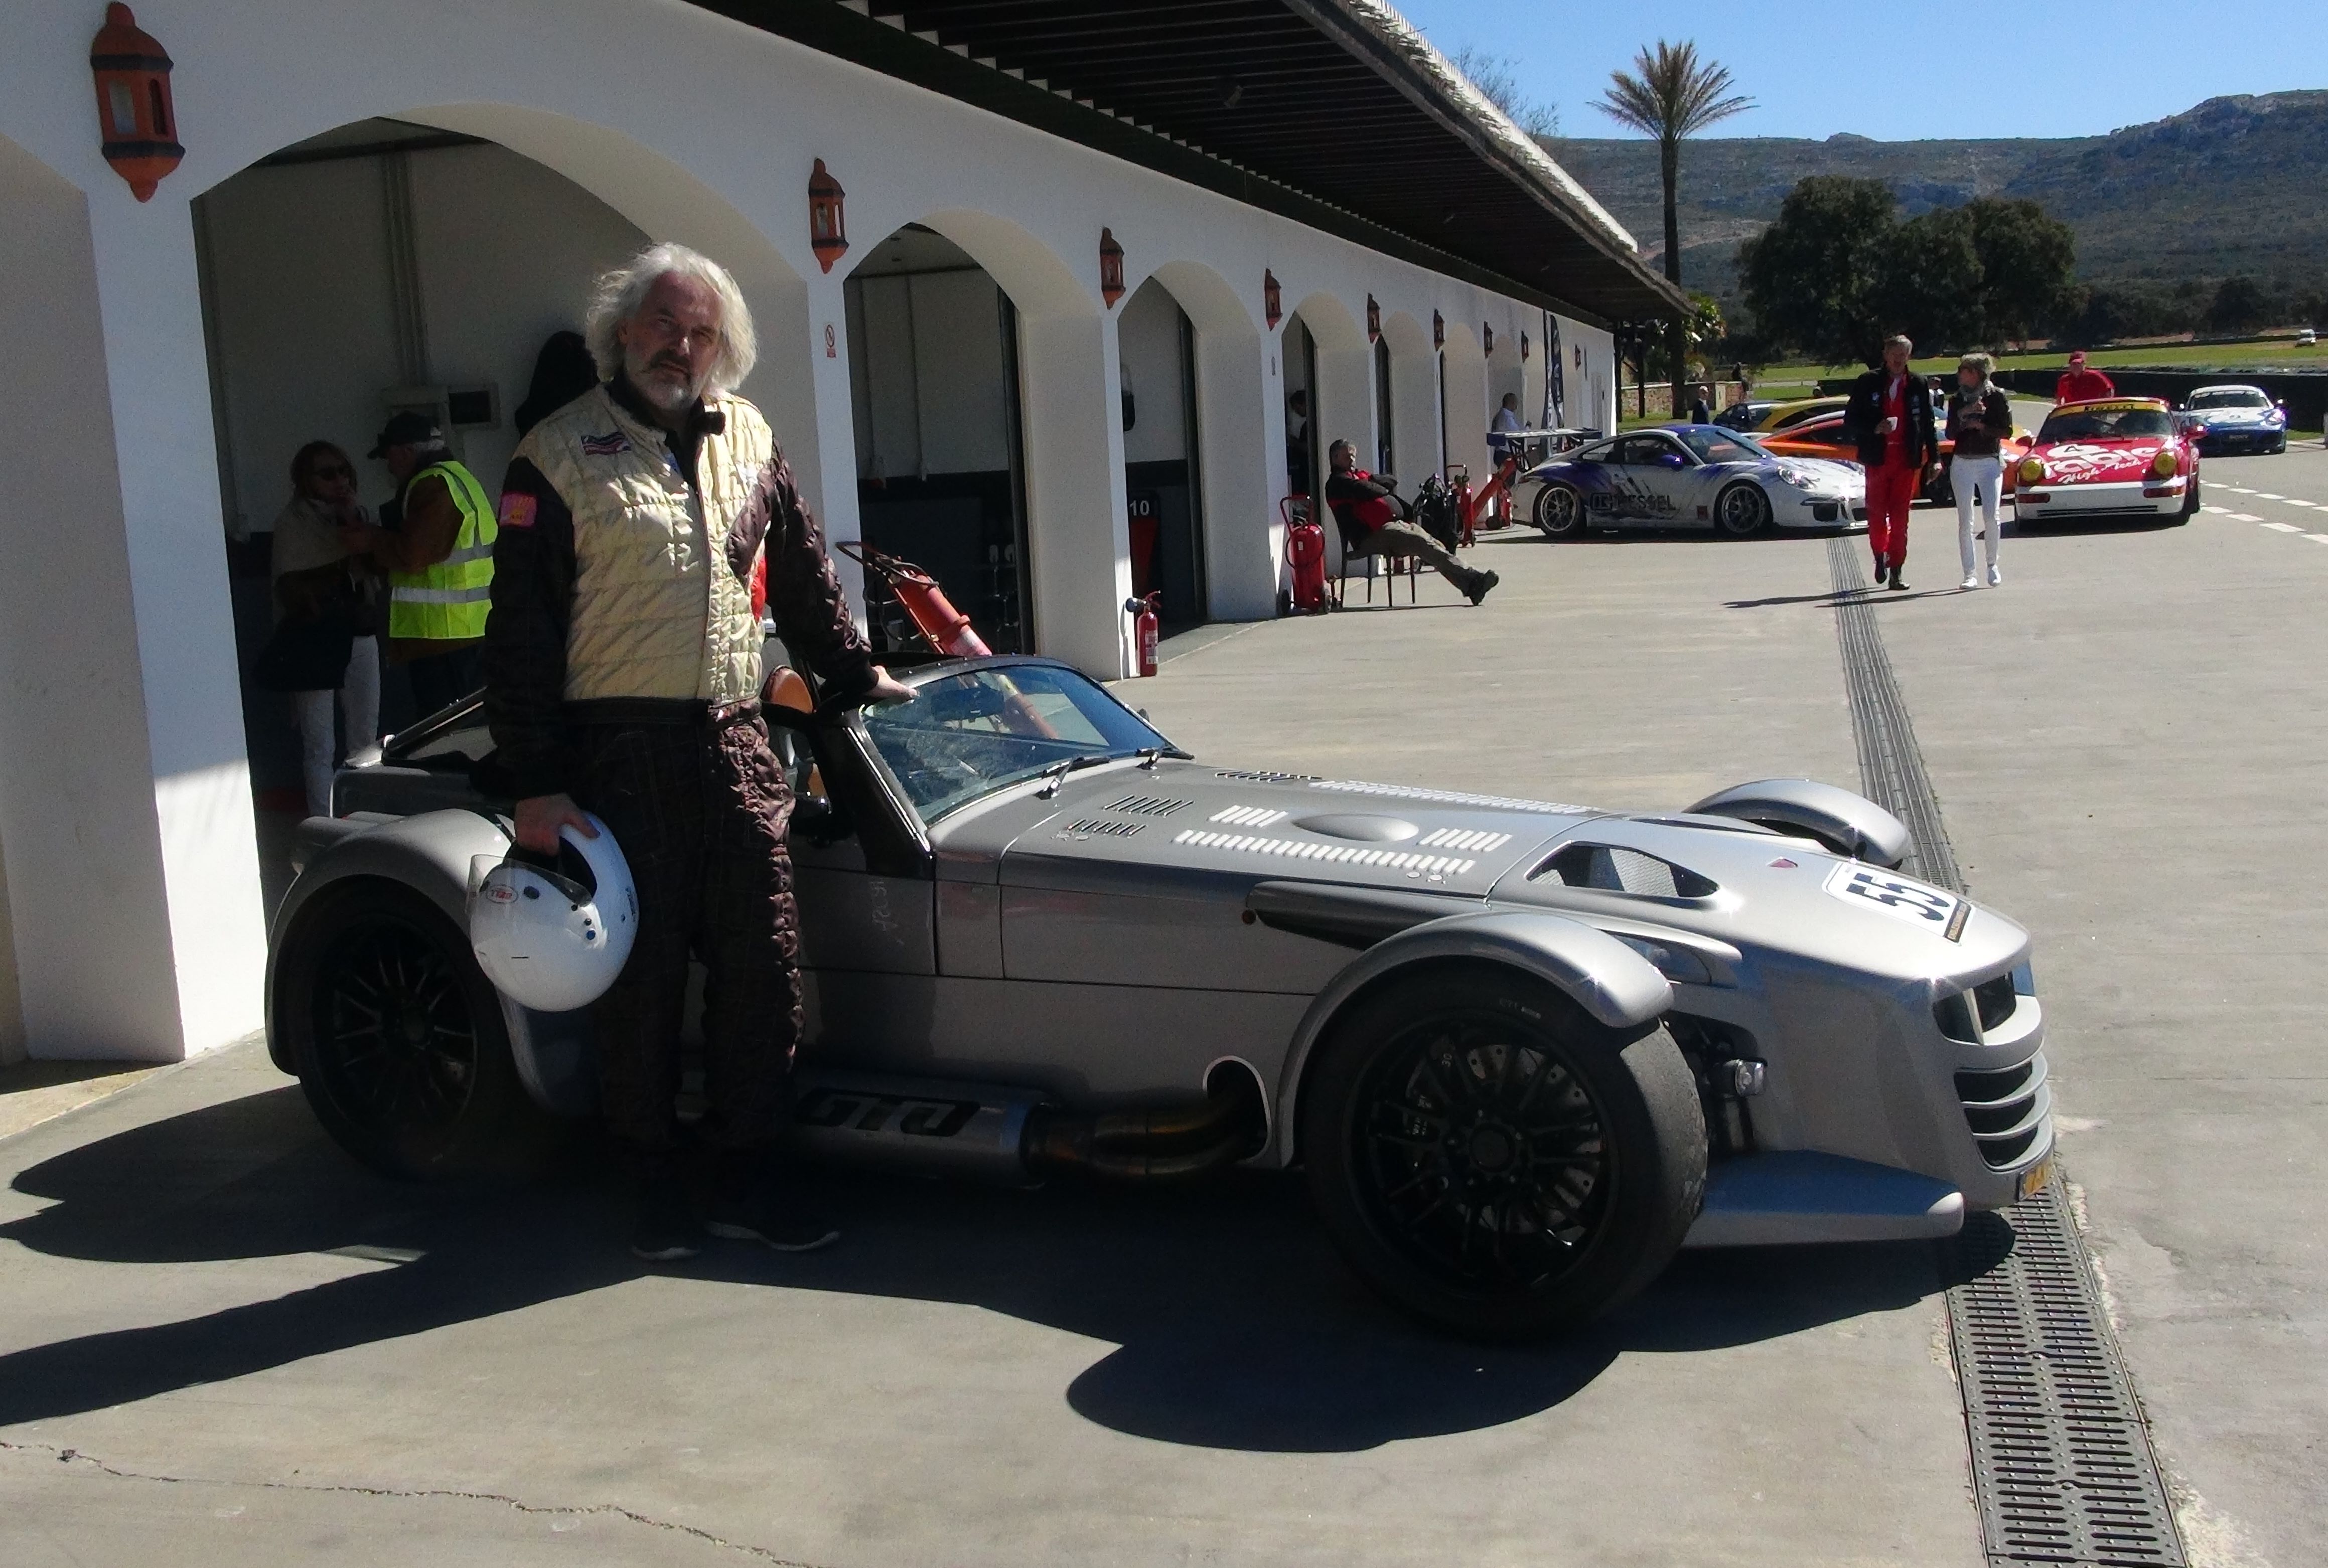 At the track with a Donkervoort